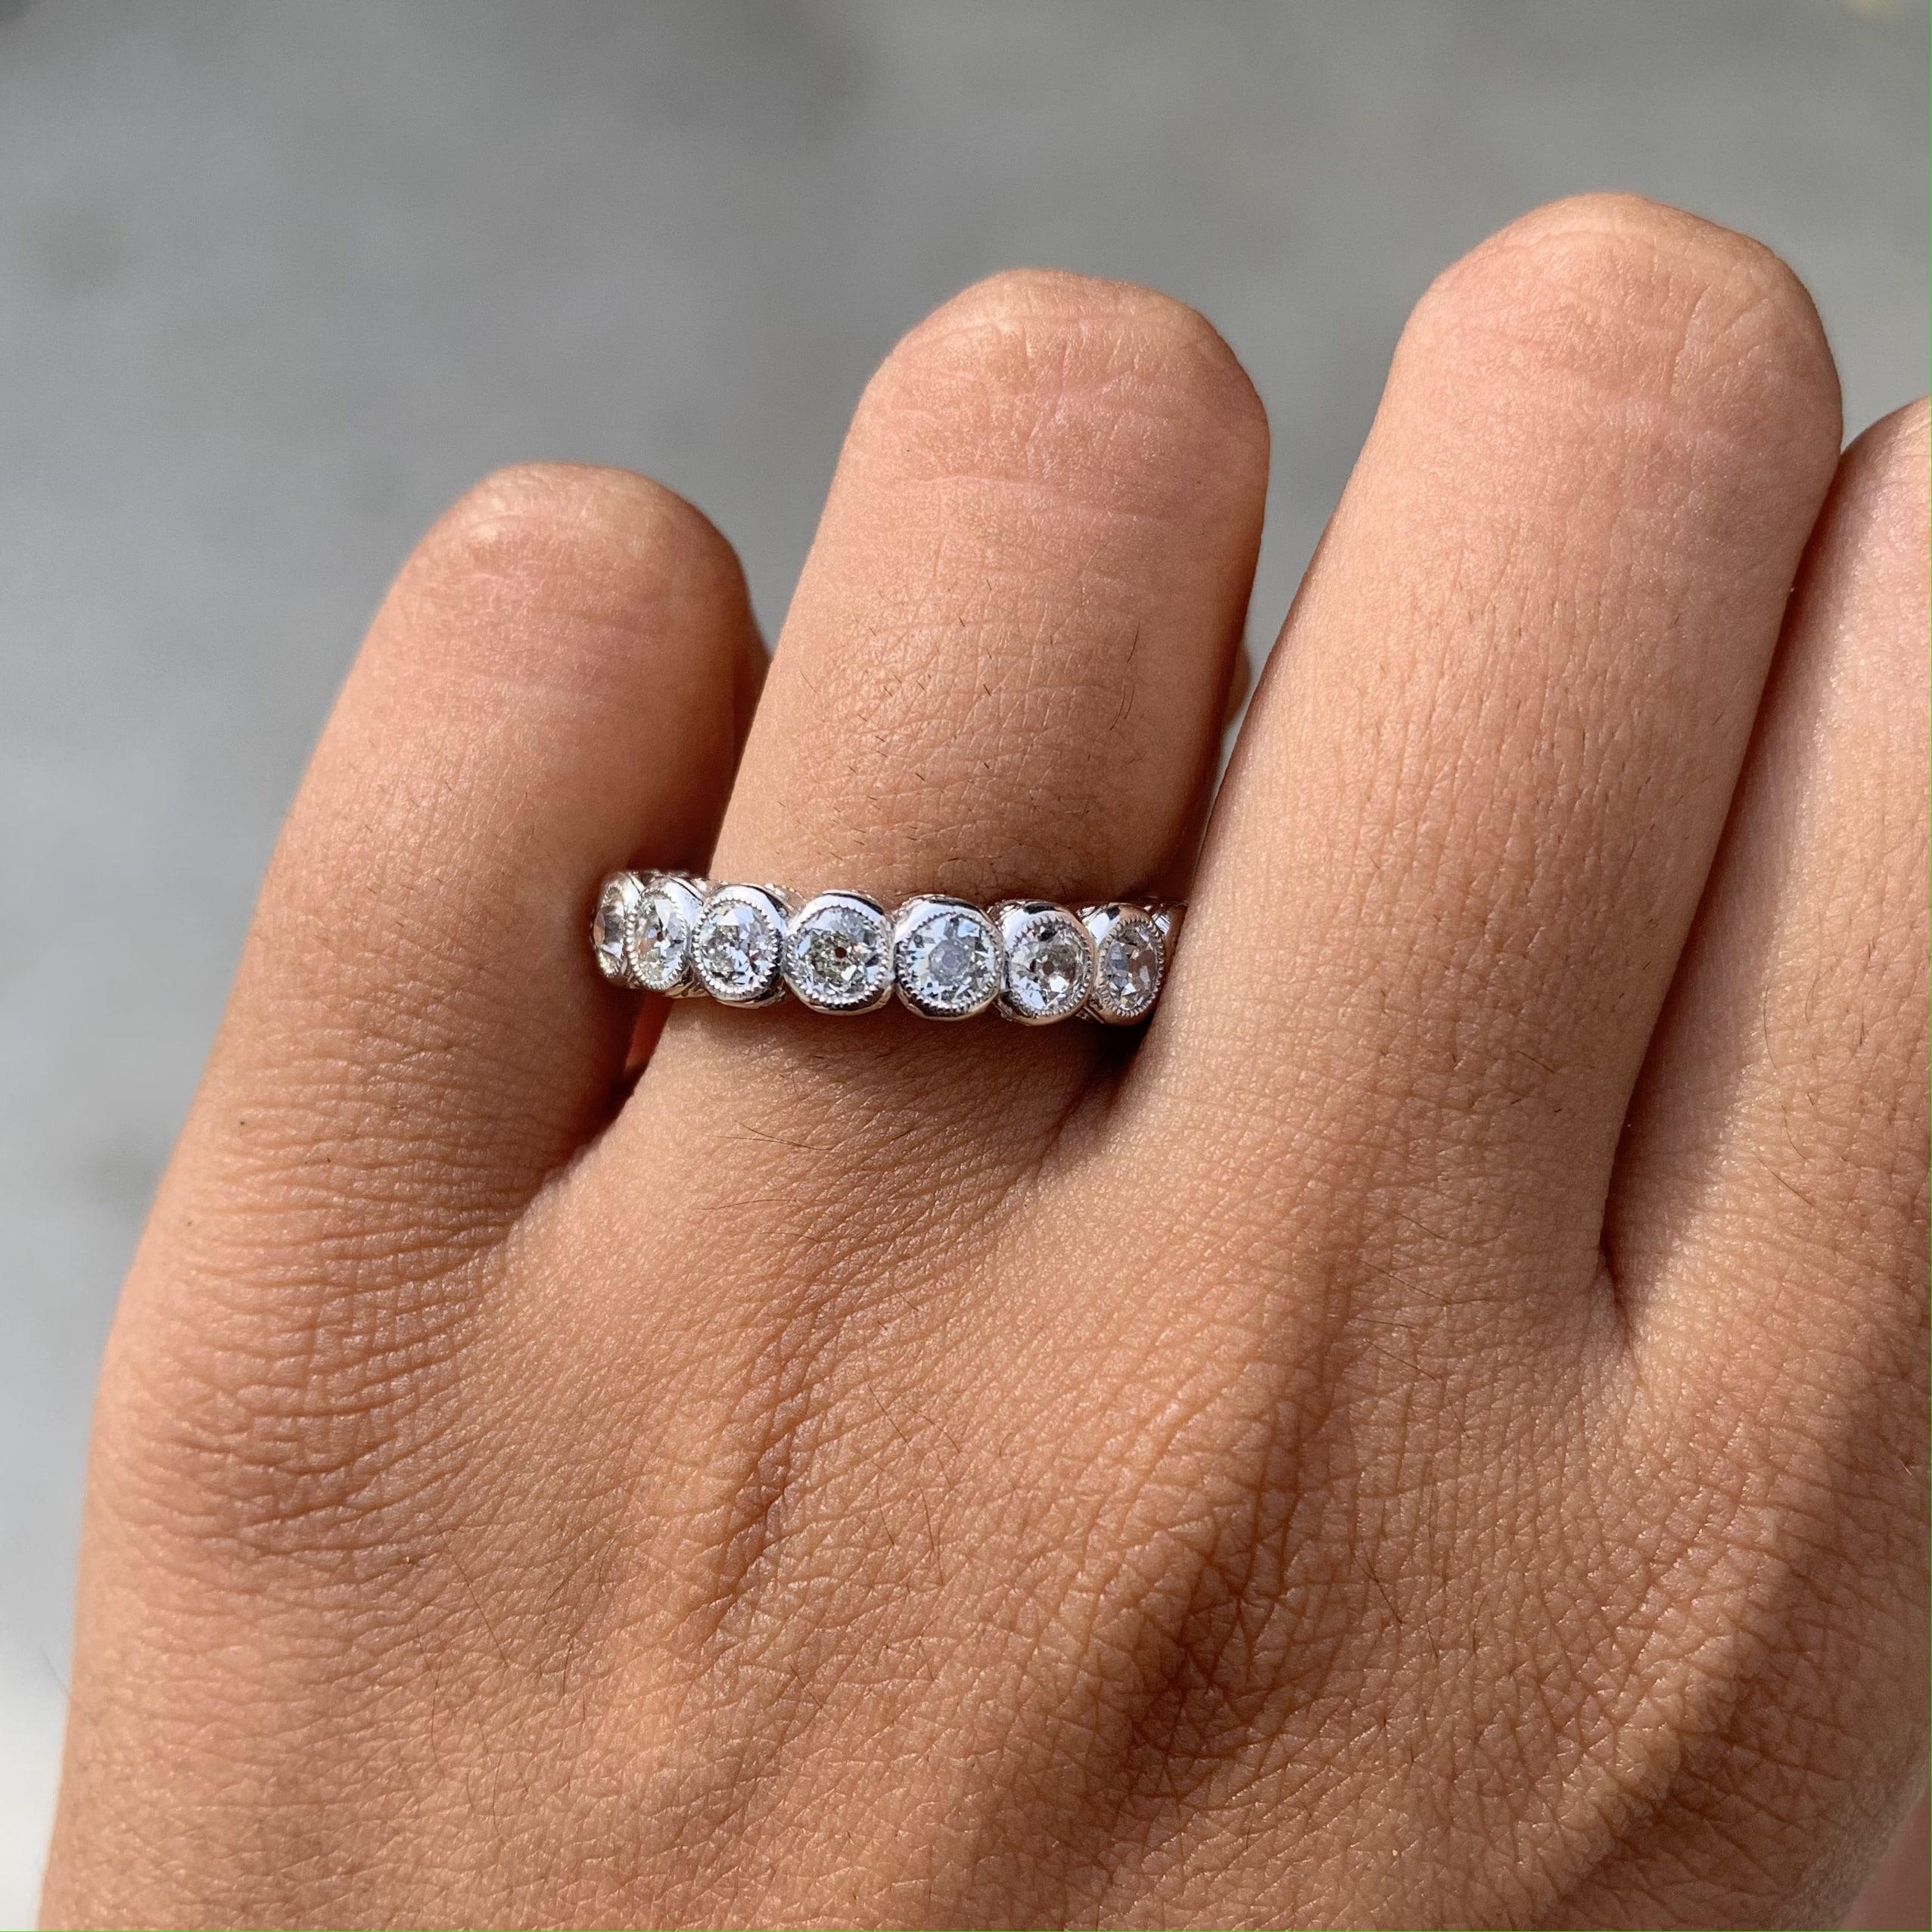 The absolutely dreamy, and eternal 2.48 Carat Old Mine Cut Diamond Ring.  An ideal ring if you're looking to propose 'the one', pop the question with this mesmerizing, vintage diamond ring! If you're looking to gift yourself, this is the perfect